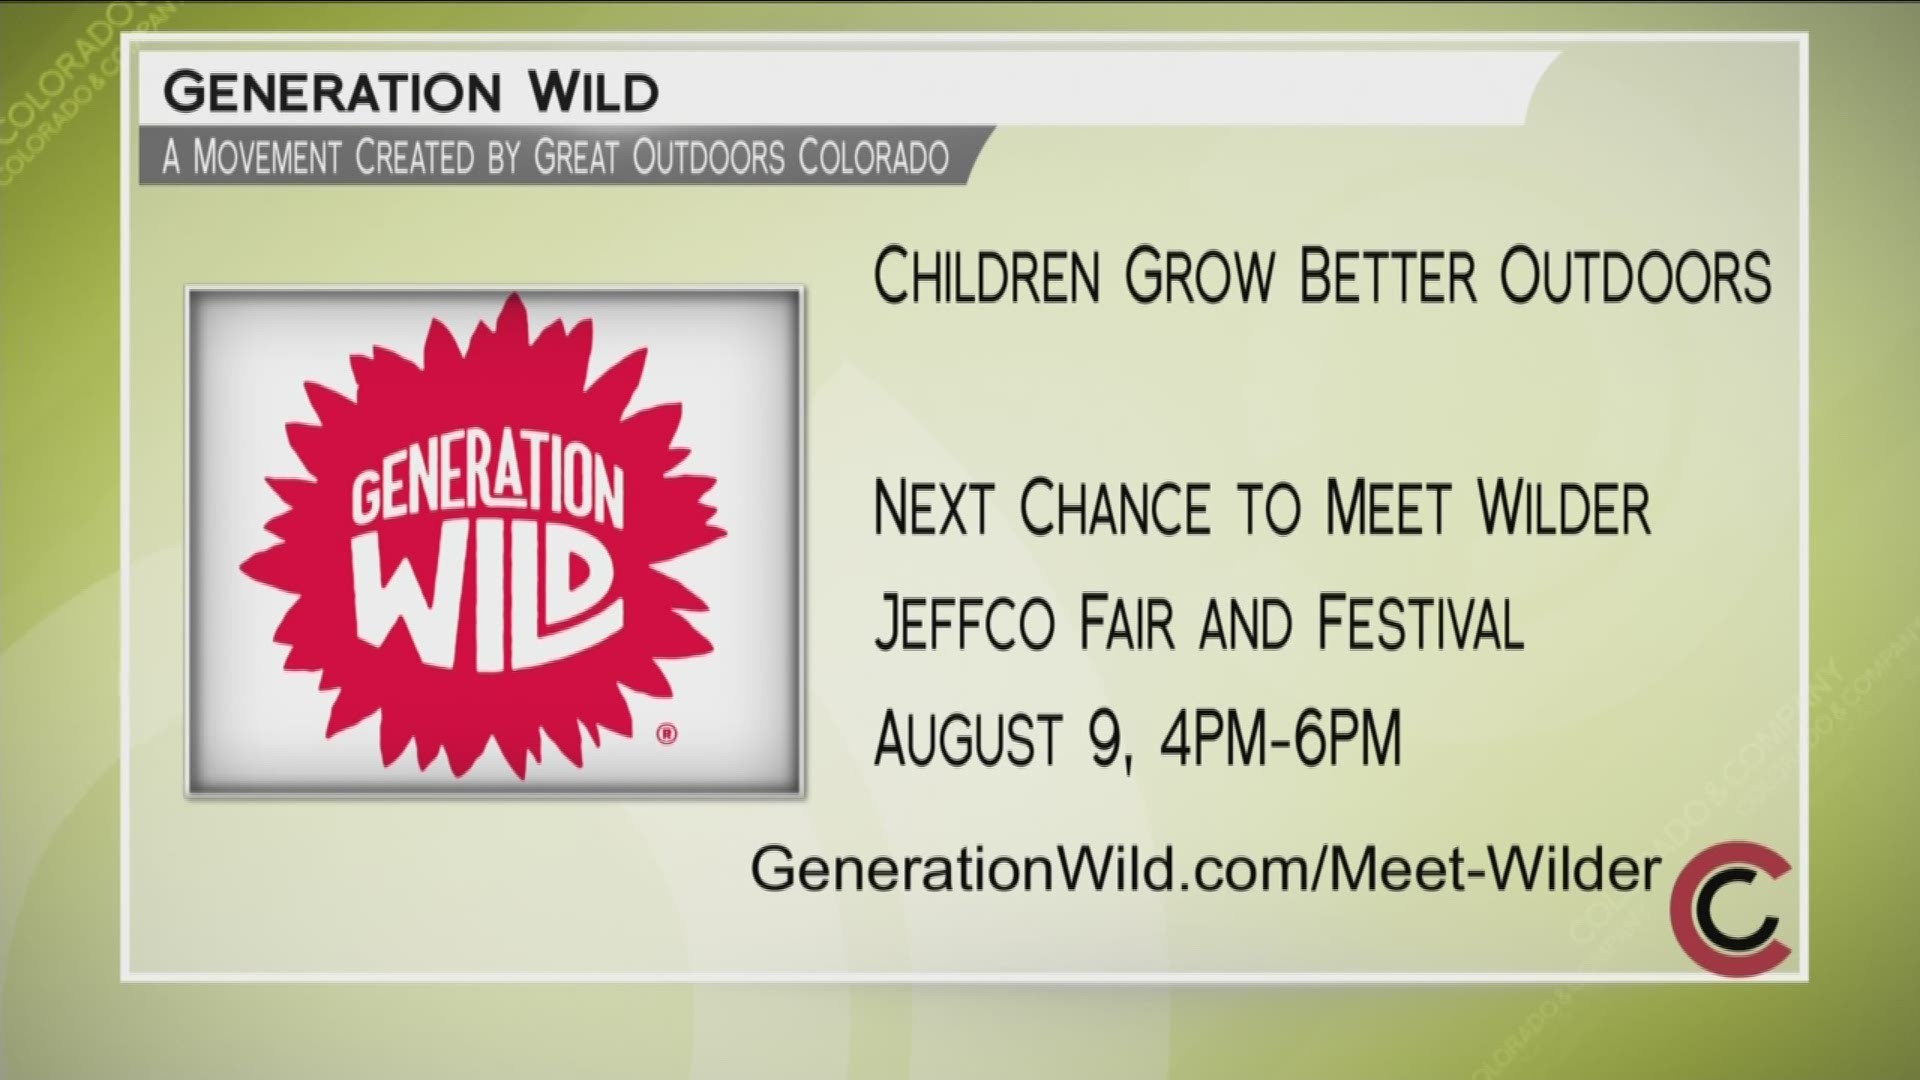 Generation Wild, a movement created by Great Outdoors Colorado wants you to encourage kids to put the screen down and go wild outside! Meet Wilder at the JeffCo Fair and Festival on August 9th. Learn more at www.GenerationWild.com, and www.GenerationWild.com/Meet-Wilder. 
THIS INTERVIEW HAS COMMERCIAL CONTENT. PRODUCTS AND SERVICES FEATURED APPEAR AS PAID ADVERTISING.